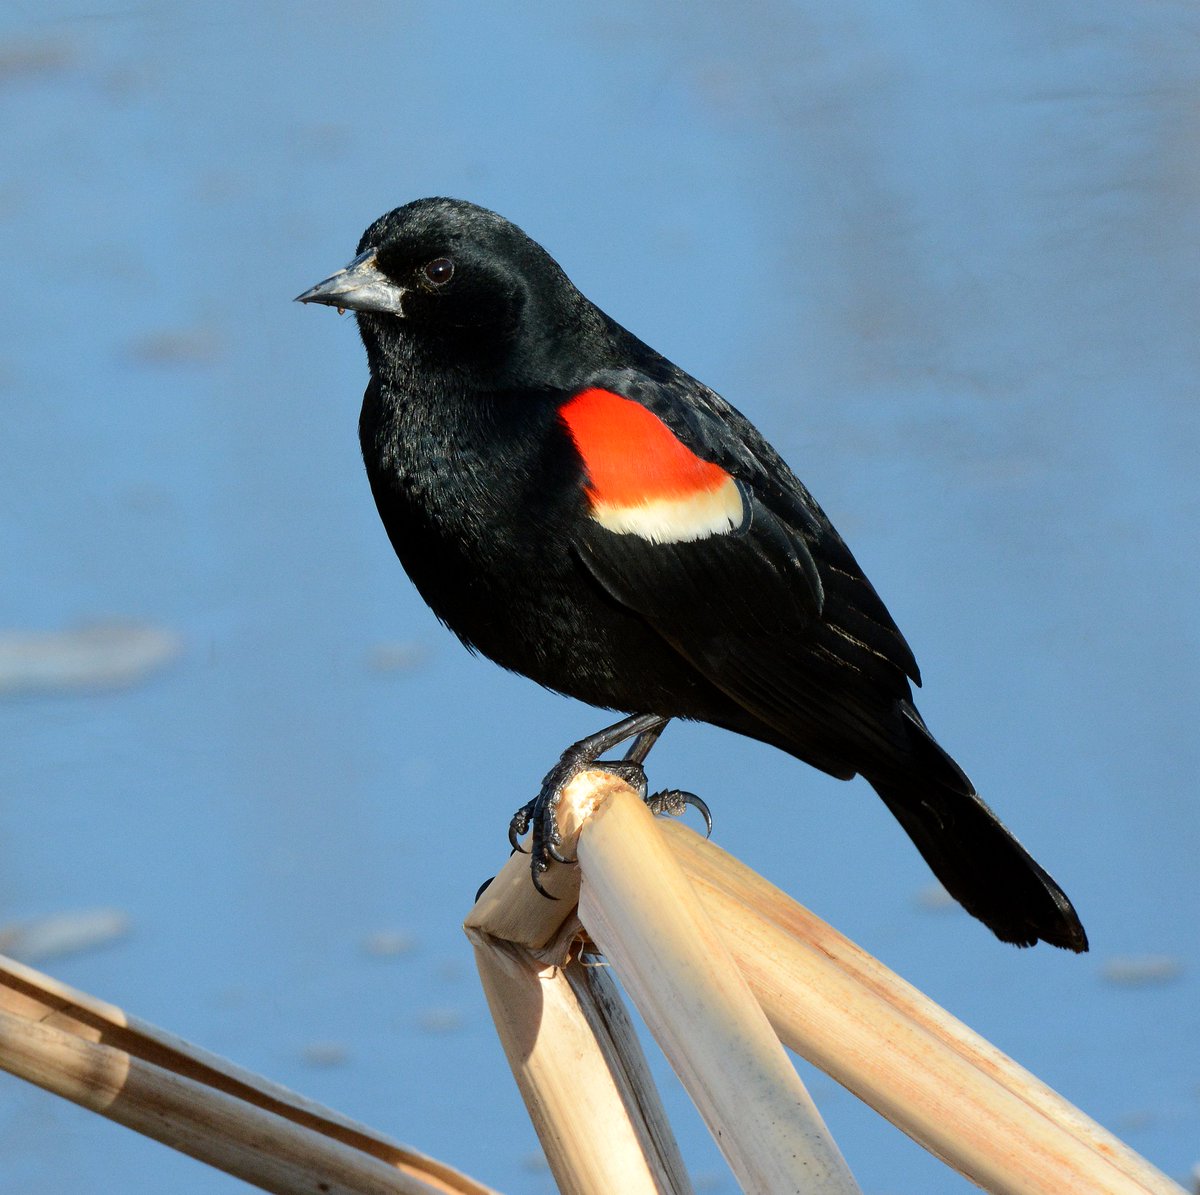 Have you seen any red-winged blackbirds lately? These birds can be found across much of the U.S. and Mexico year-round, but those that breed in parts of the north, including much of Canada can only be found in the summer. 📷 Jim Hudgins/USFWS